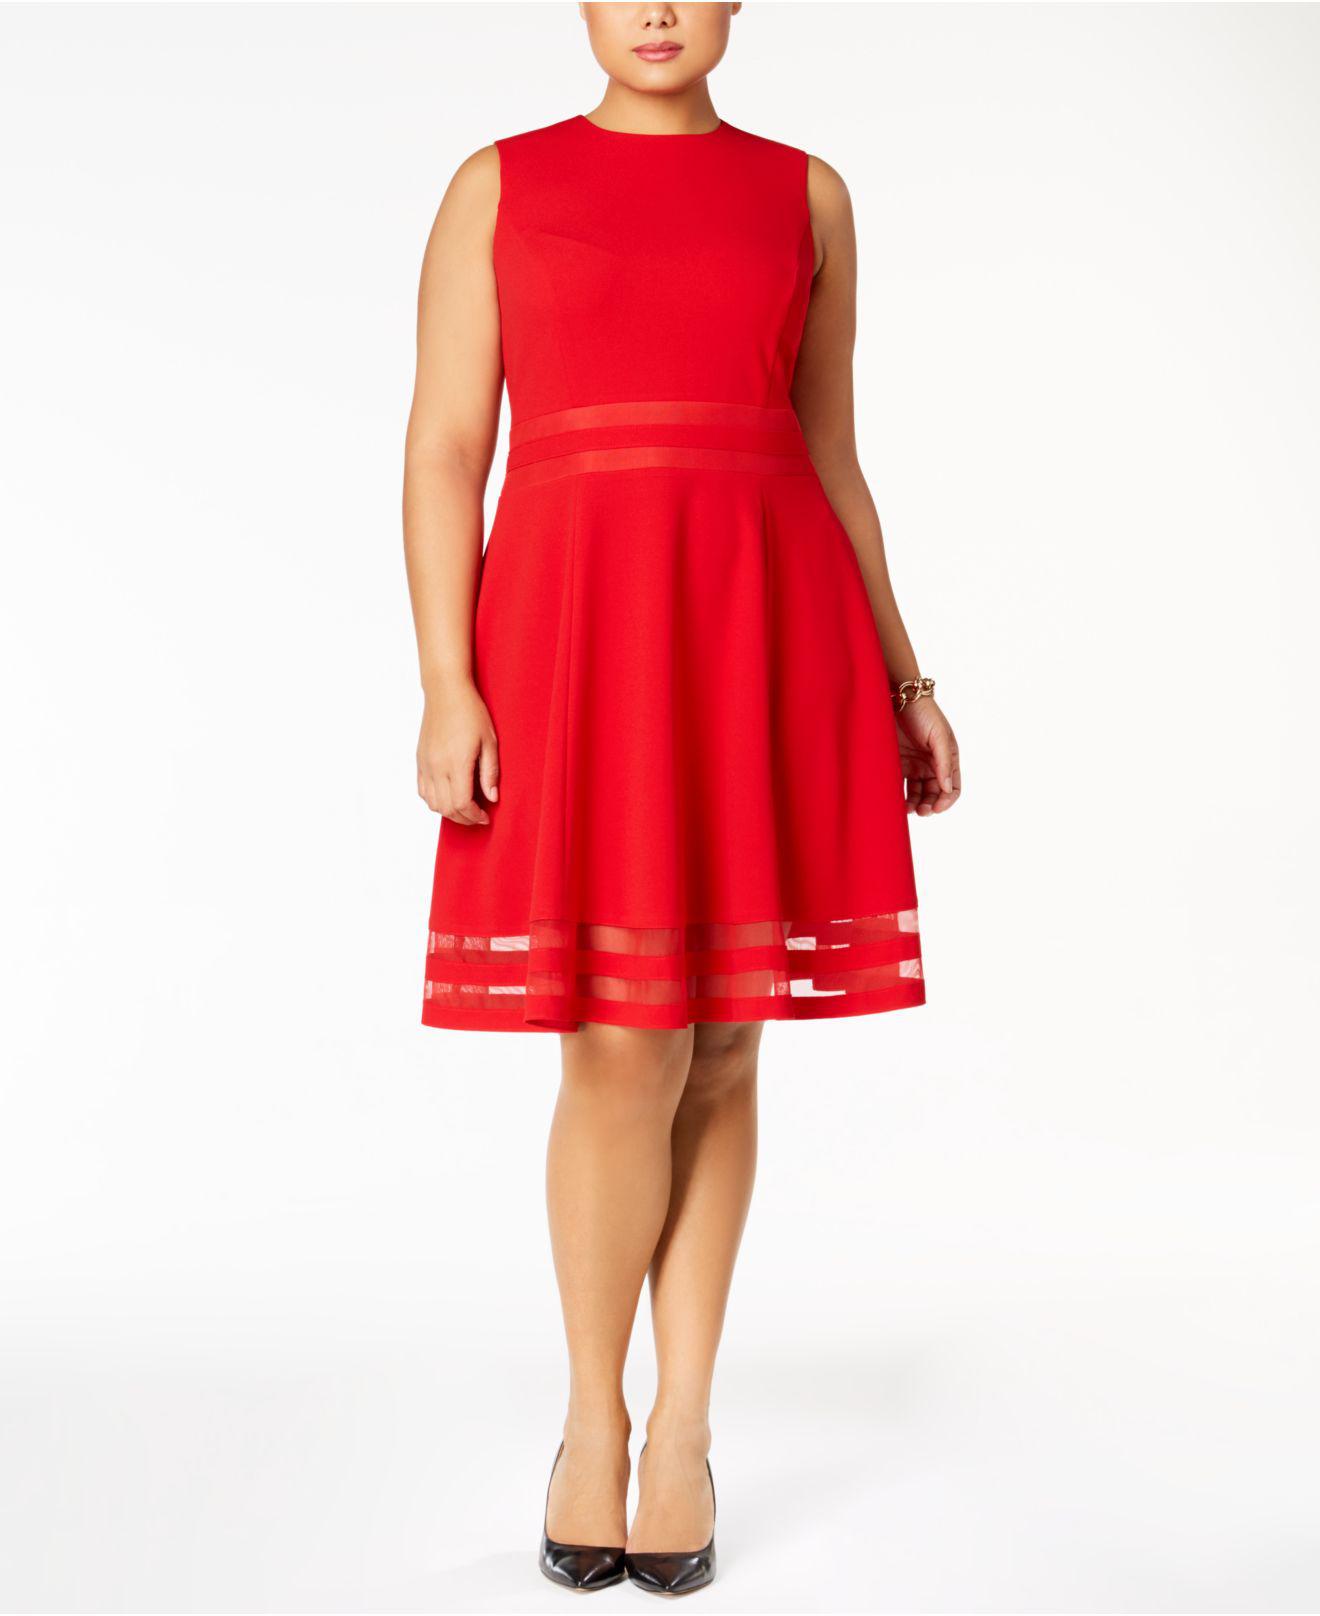 calvin klein illusion trim fit and flare dress